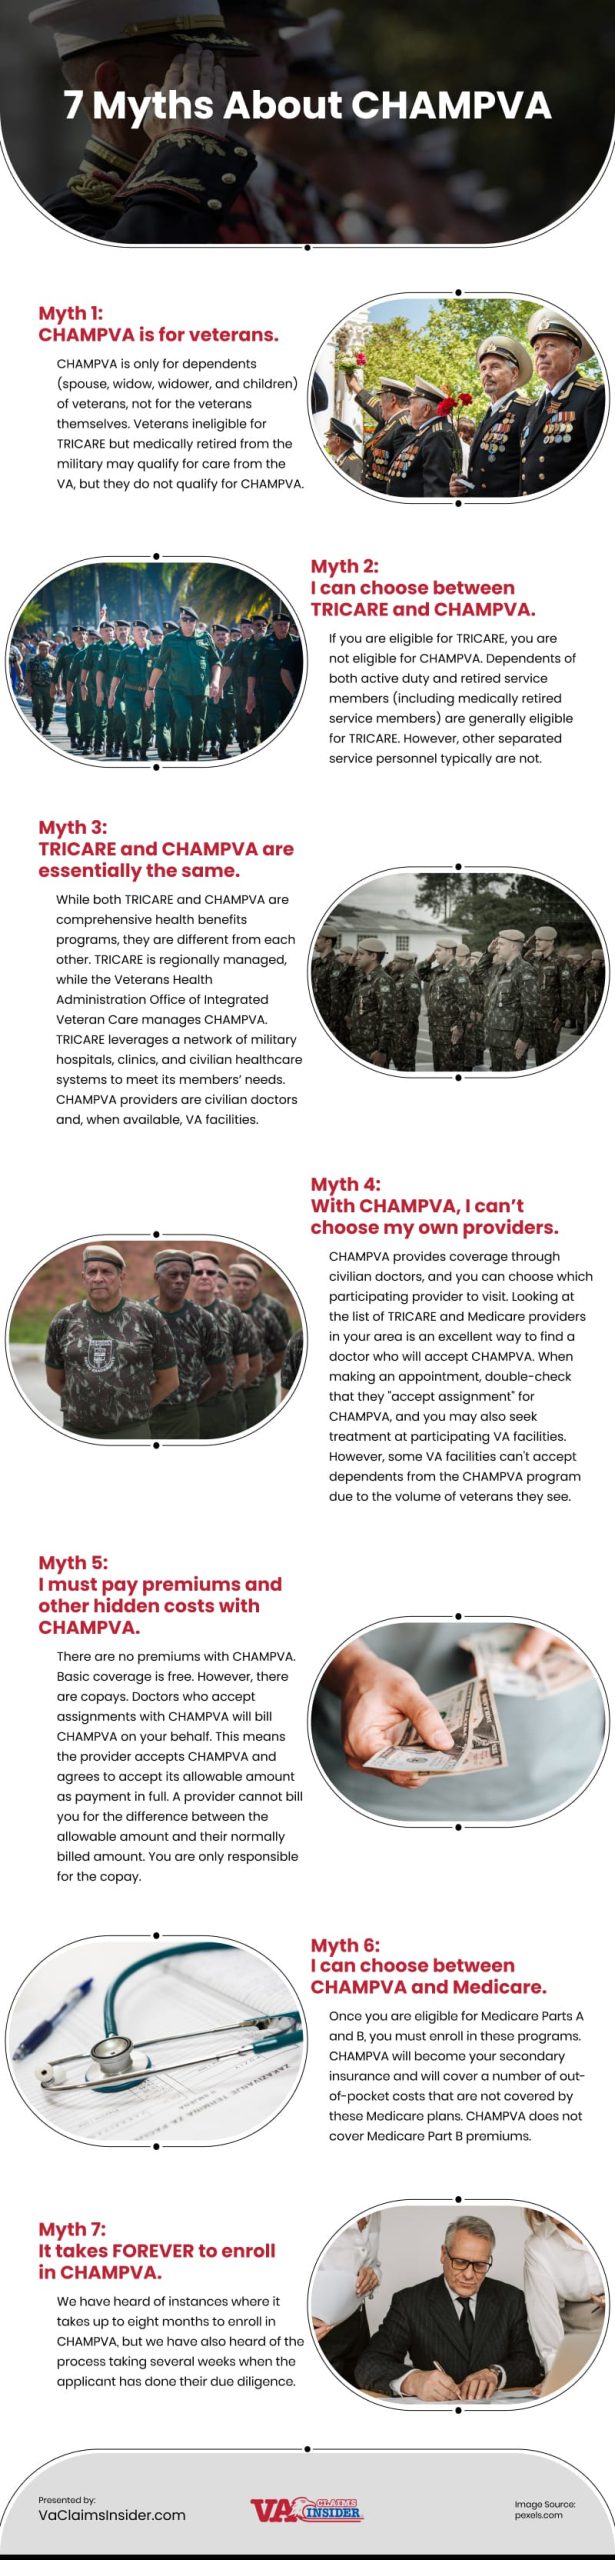 7 Myths About CHAMPVA Infographic